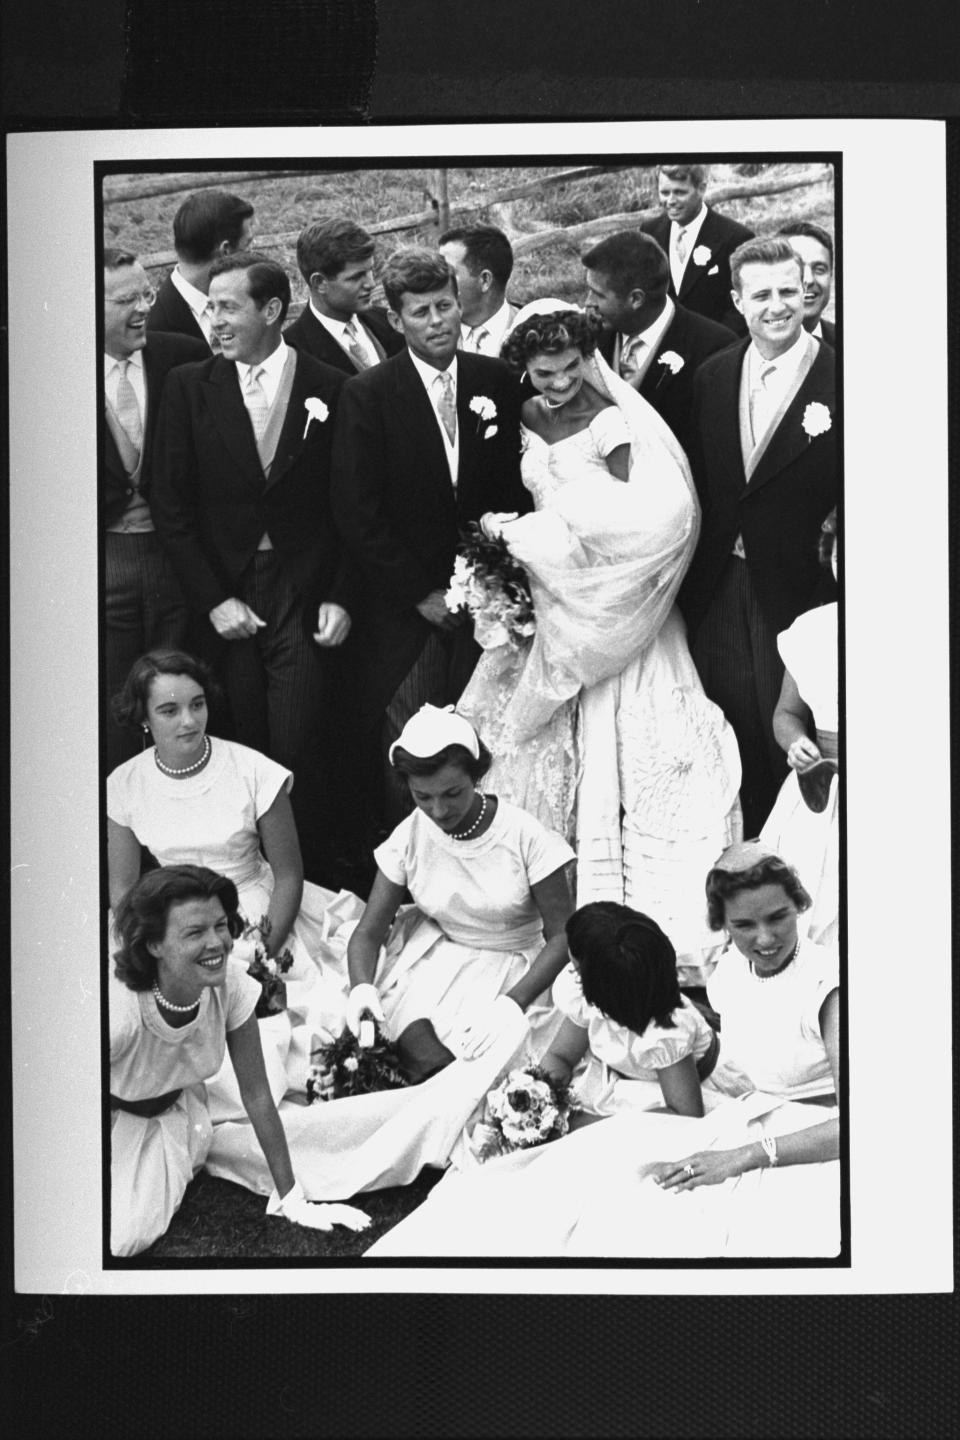 Sen. John Kennedy & his bride Jacqueline in their wedding attire, standing with 10 ushers incl. Teddy & Bobby Kennedy as 4 bridesmaids & flower girls sits on lawn in front of them while attempting to pose for group shot at their wedding. (Photo by Lisa Larsen//Time Life Pictures/Getty Images)